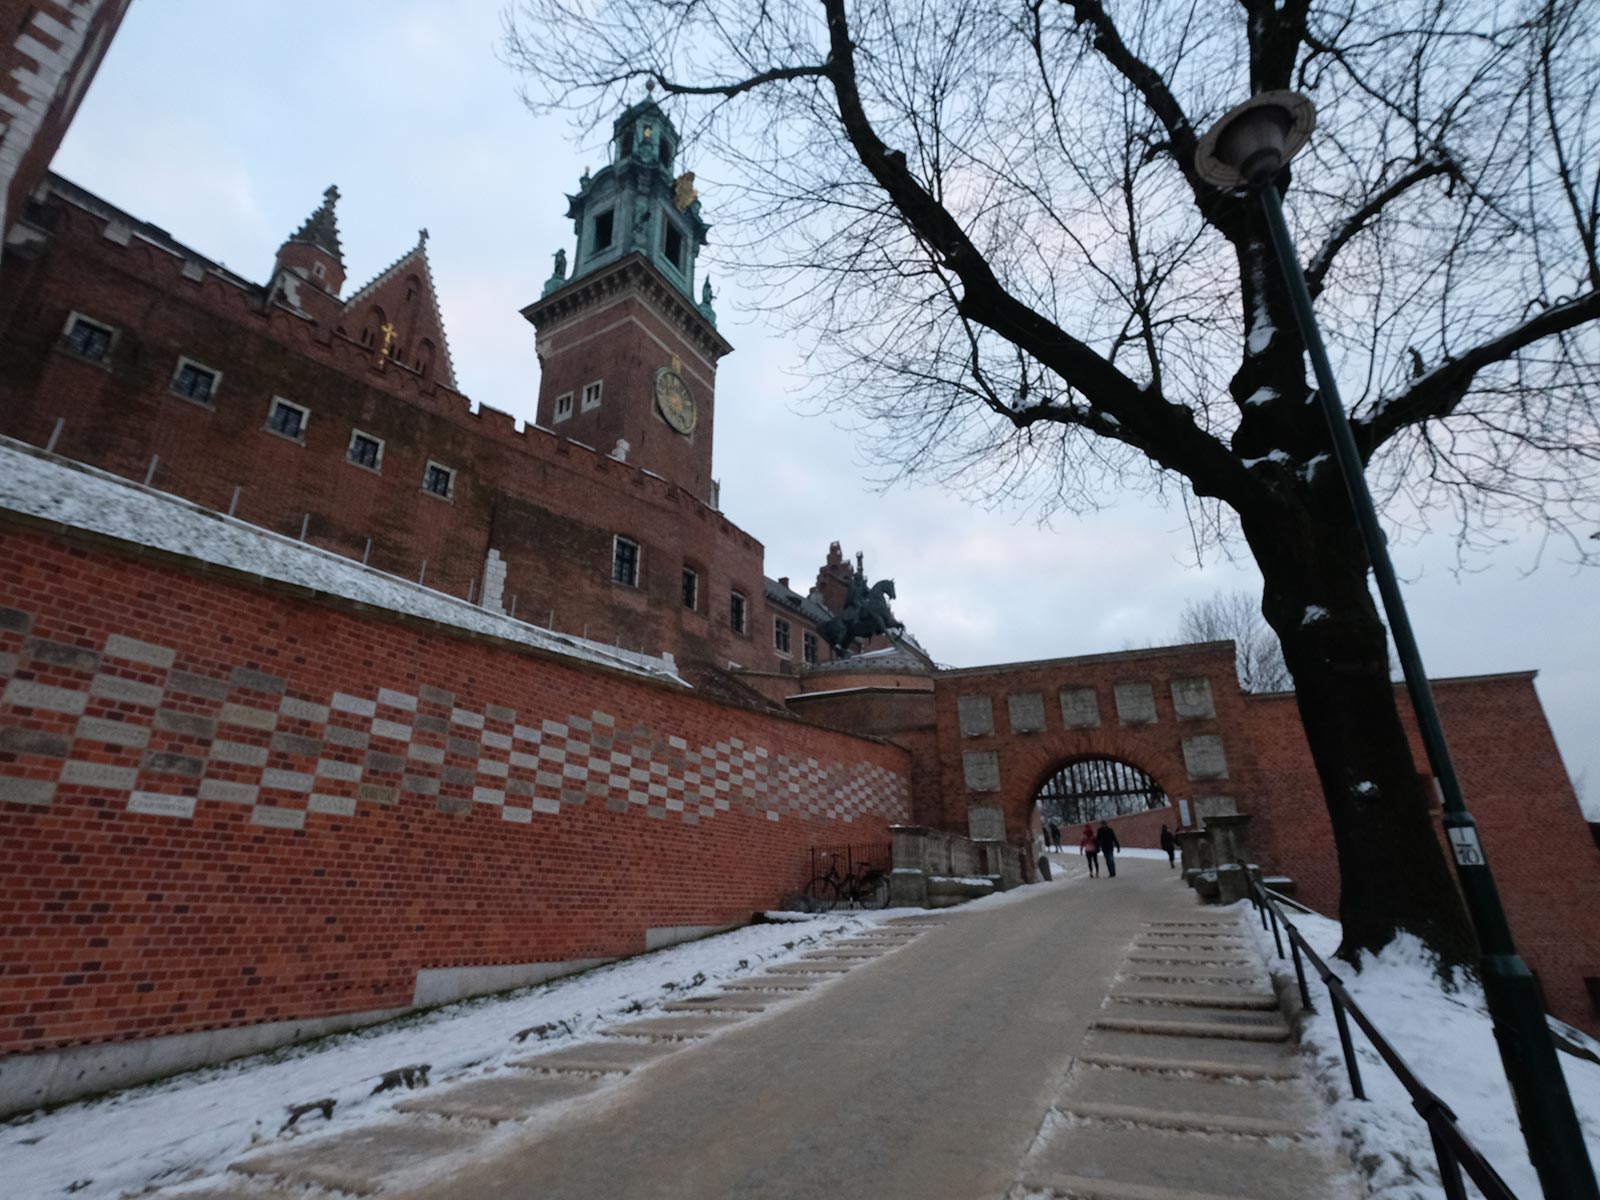 Royal Castle and Cathedral in Krakow, Poland. Full guide & itinerary for Krakow